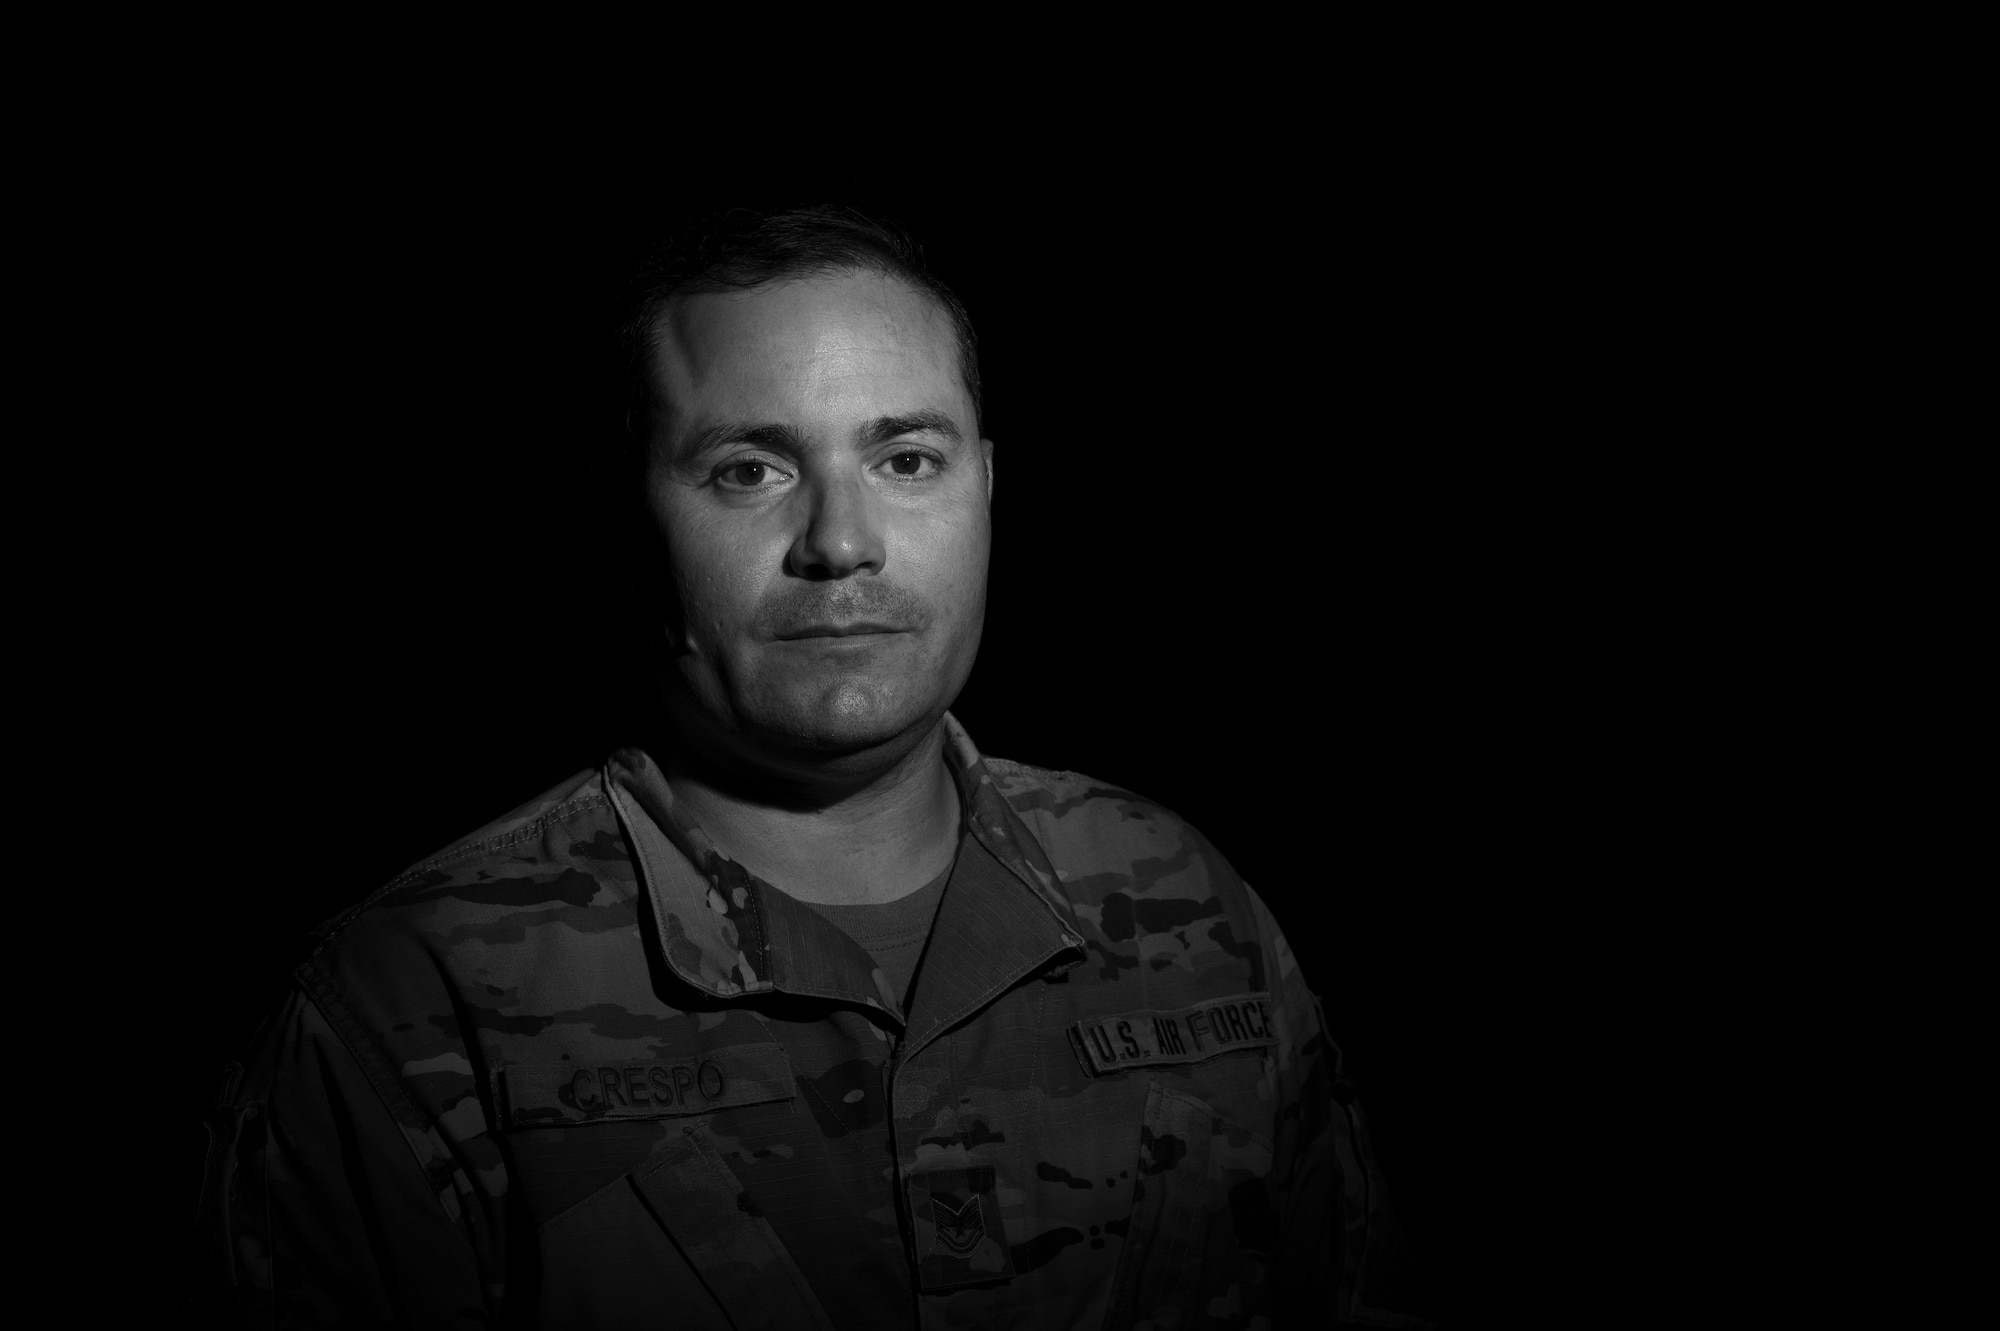 Tech Sgt. Charles Crespo, 436th Airlift Wing diversity and inclusion manager, shares his story of physical injury, prescribed narcotic dependency and his fight to change how disabled Airmen are viewed in the Air Force, in honor of Suicide Awareness Month 2022.